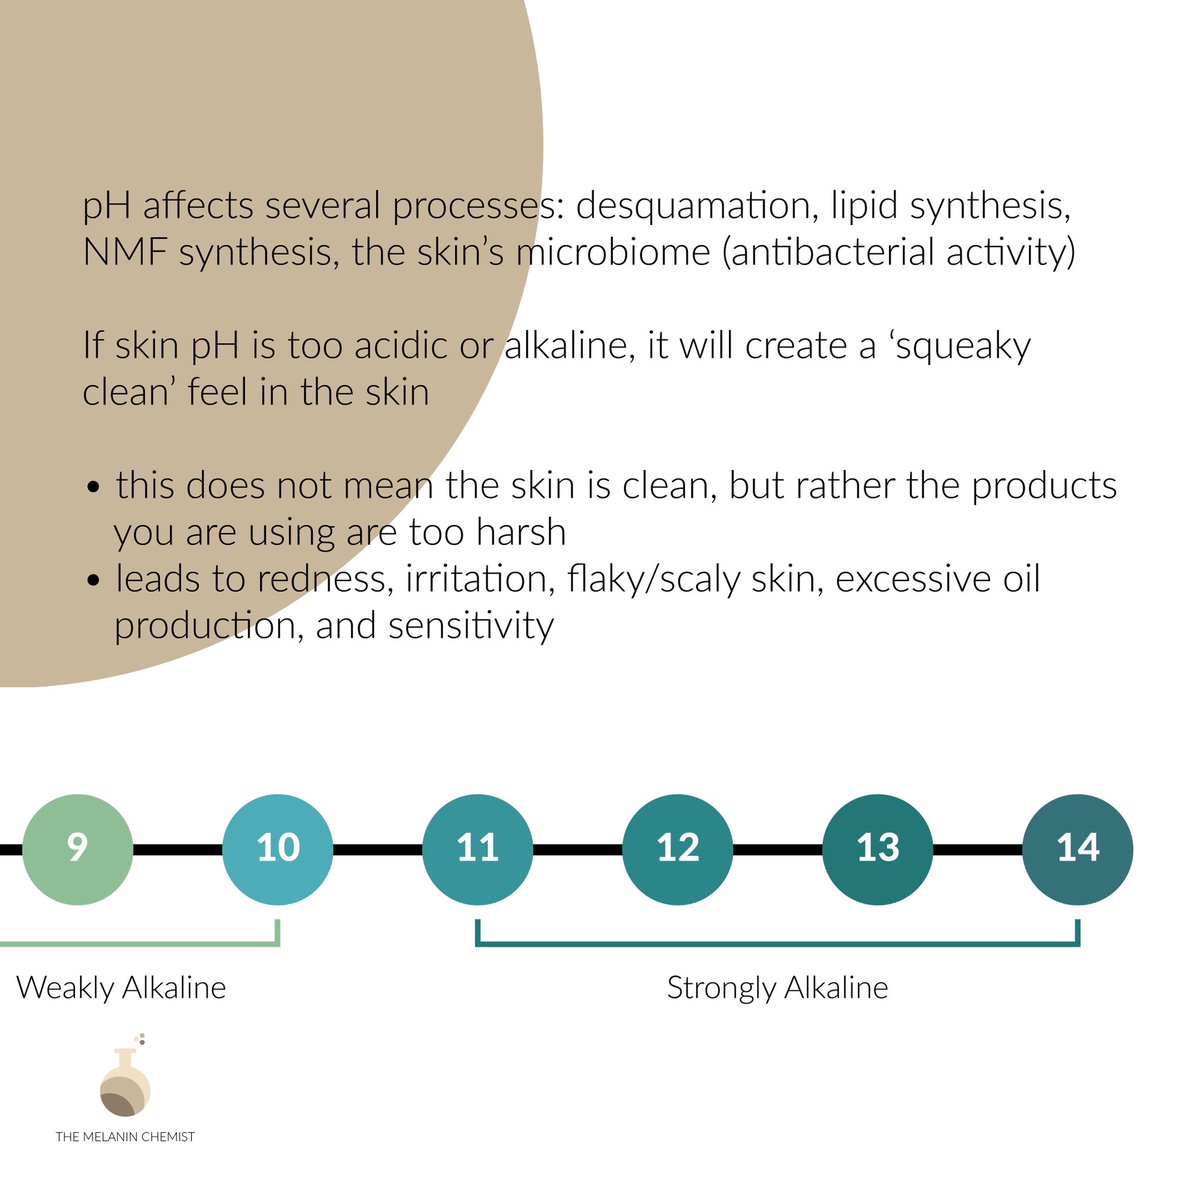 Why is pH so important? Well if it gets affected your skin’s bioprocesses will get affected: your skin will not shed skin cells normally, make essential lipids, your skin will lose even MORE WATER, and the barrier overall will get messed up among many other things